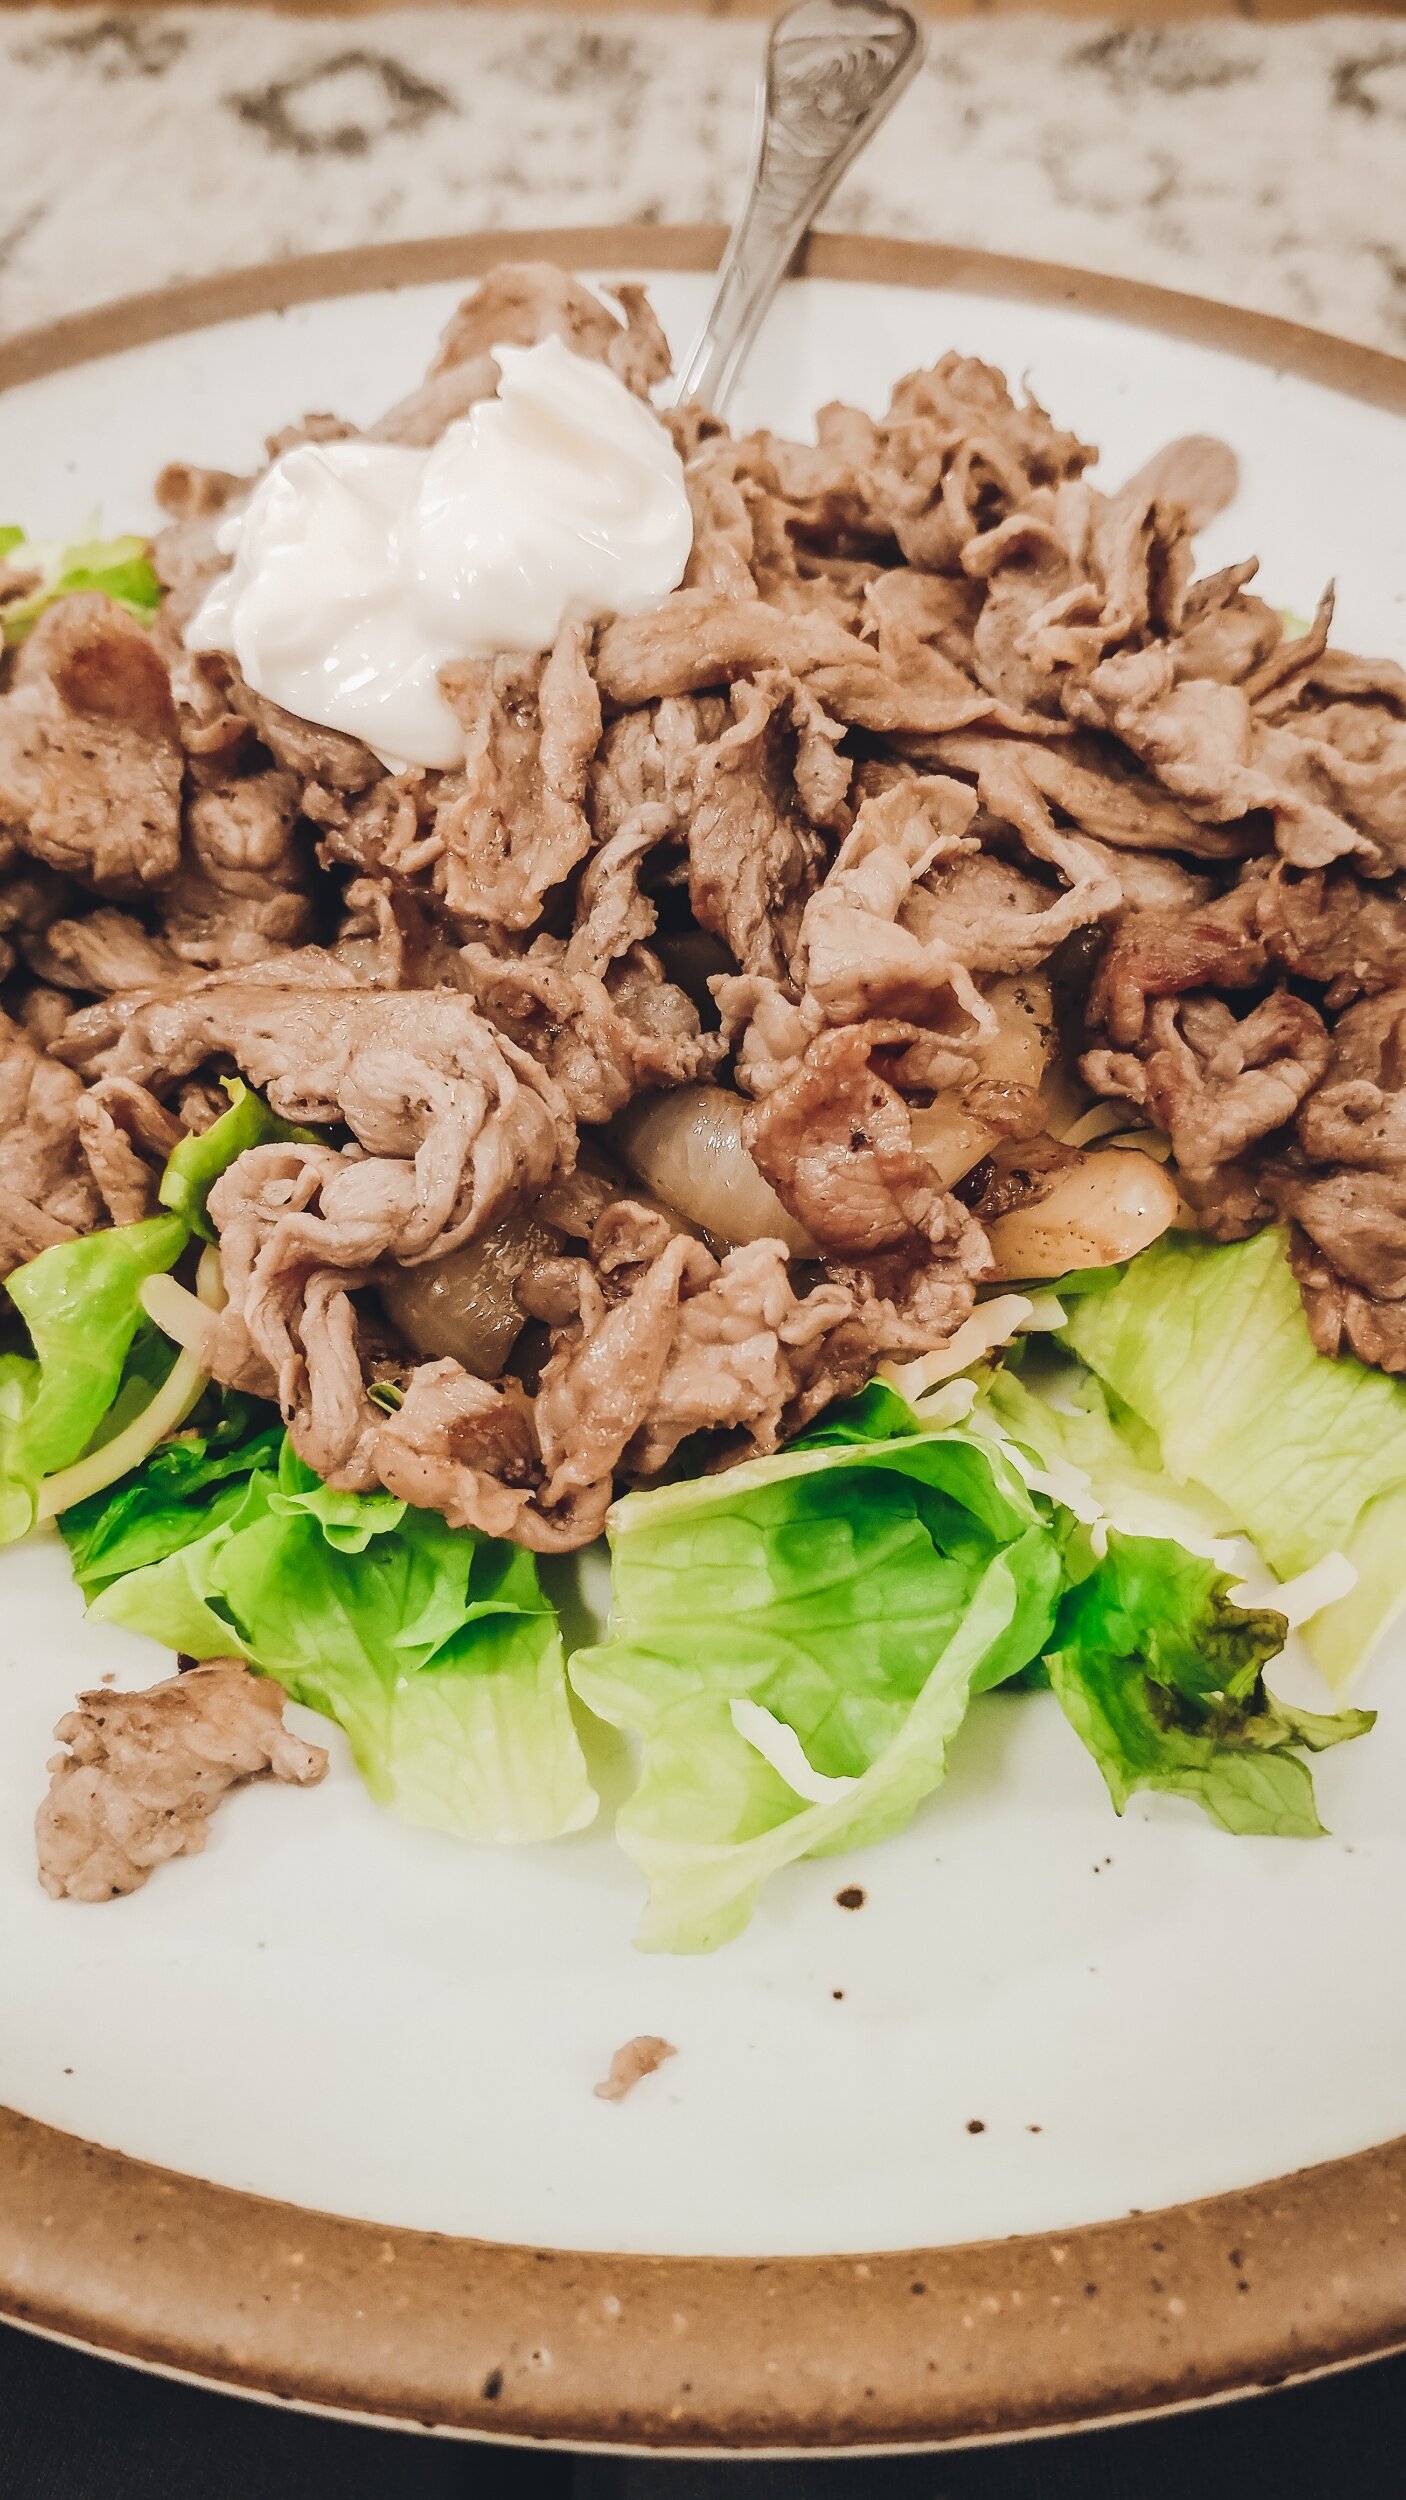 processed_0210201835Healthy Beef Salad Recipes - Hot Salad Recipes  by Bessie Roaming - If you are looking for a delicious healthy dinner look no further! This healthy hot beef salad is amazing!